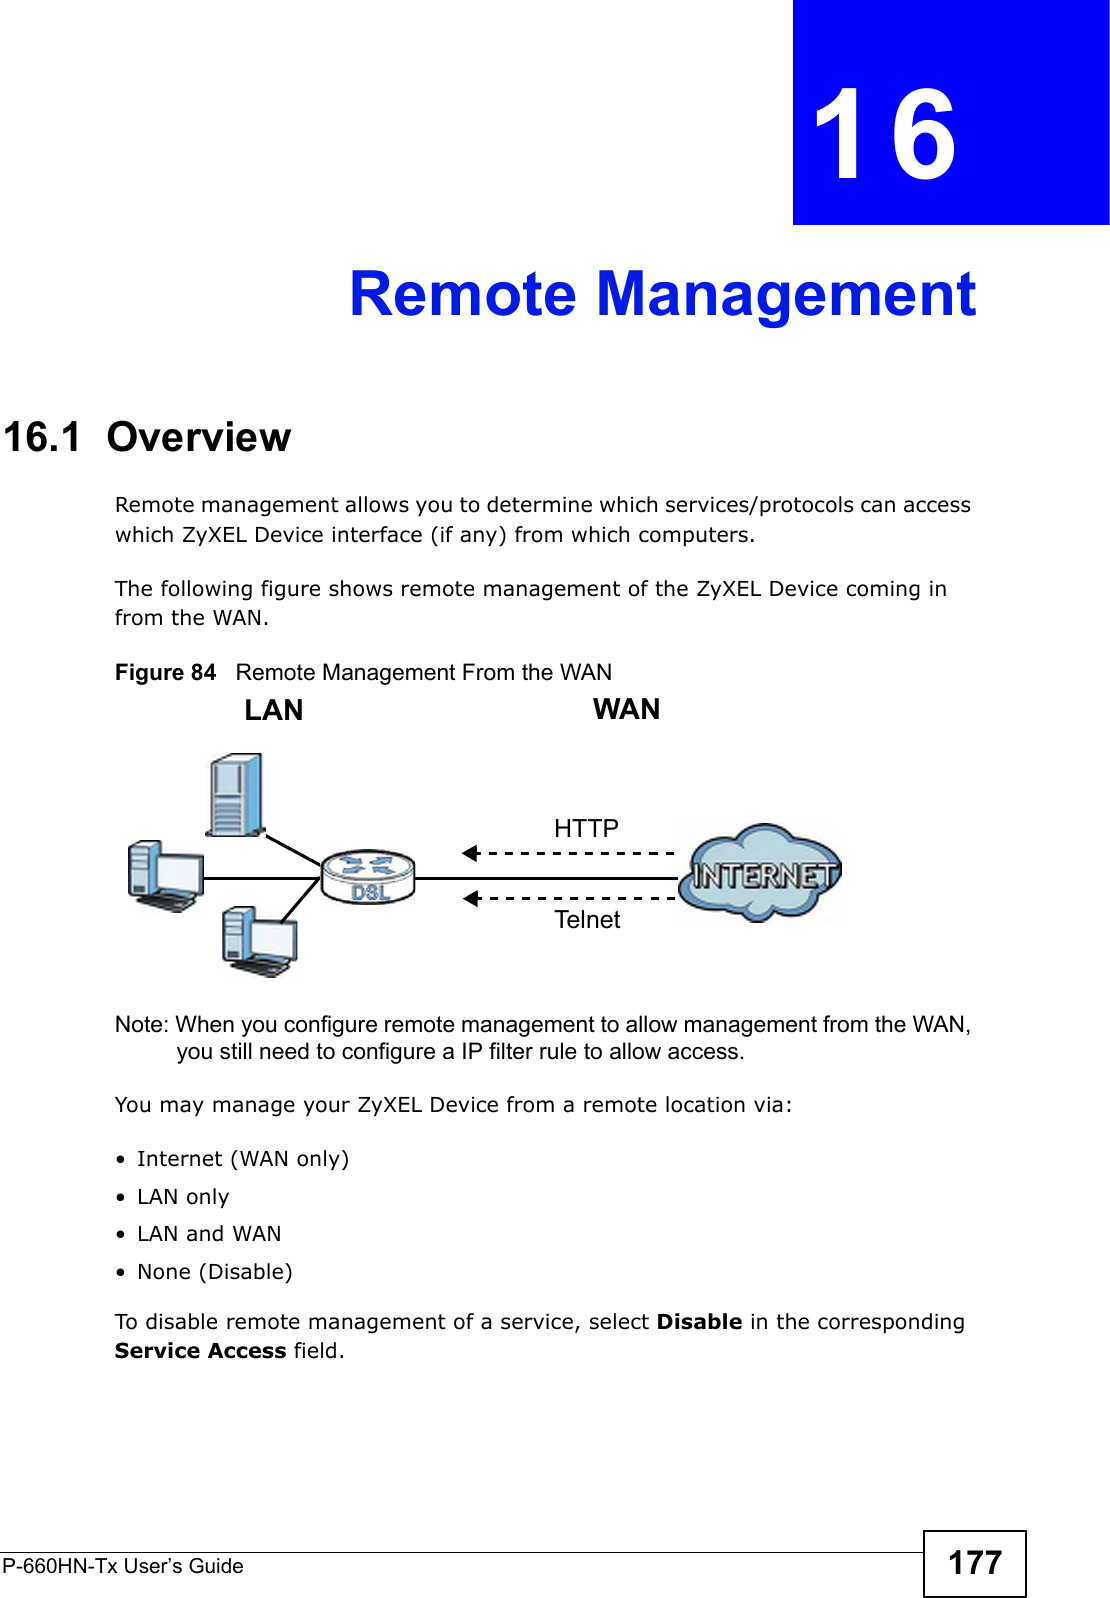 P-660HN-Tx User’s Guide 177CHAPTER  16 Remote Management16.1  OverviewRemote management allows you to determine which services/protocols can access which ZyXEL Device interface (if any) from which computers.The following figure shows remote management of the ZyXEL Device coming in from the WAN.Figure 84   Remote Management From the WANNote: When you configure remote management to allow management from the WAN, you still need to configure a IP filter rule to allow access.You may manage your ZyXEL Device from a remote location via:•Internet (WAN only)•LAN only•LAN and WAN• None (Disable)To disable remote management of a service, select Disable in the corresponding Service Access field.LAN WANHTTPTelnet